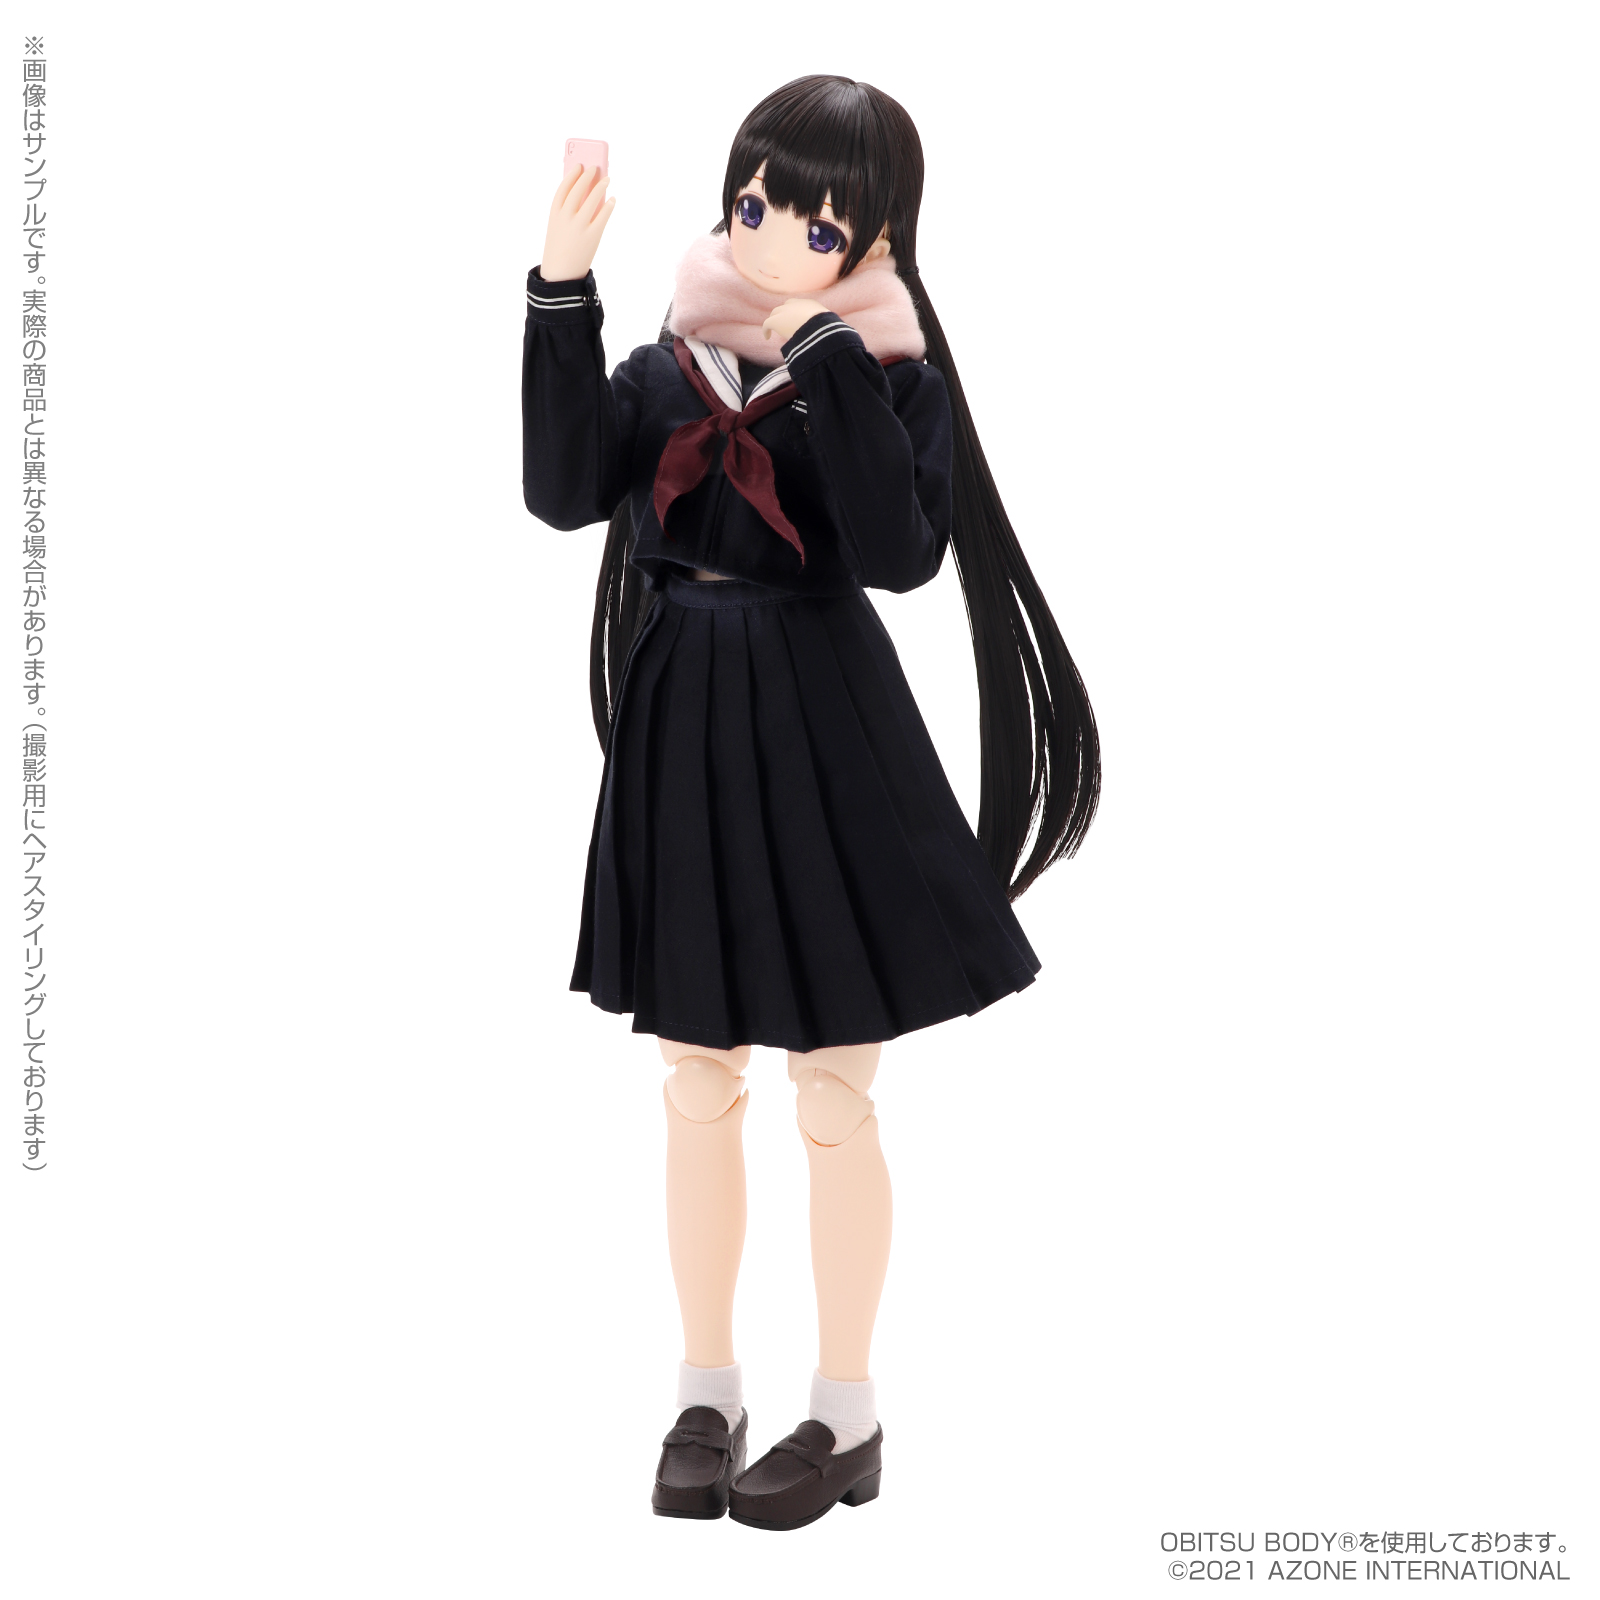 Happiness Clover 和遥キナ学校制服コレクション『和遥清心女子学園ver./まひろ』ハピネスクローバー 1/3 完成品ドール-002